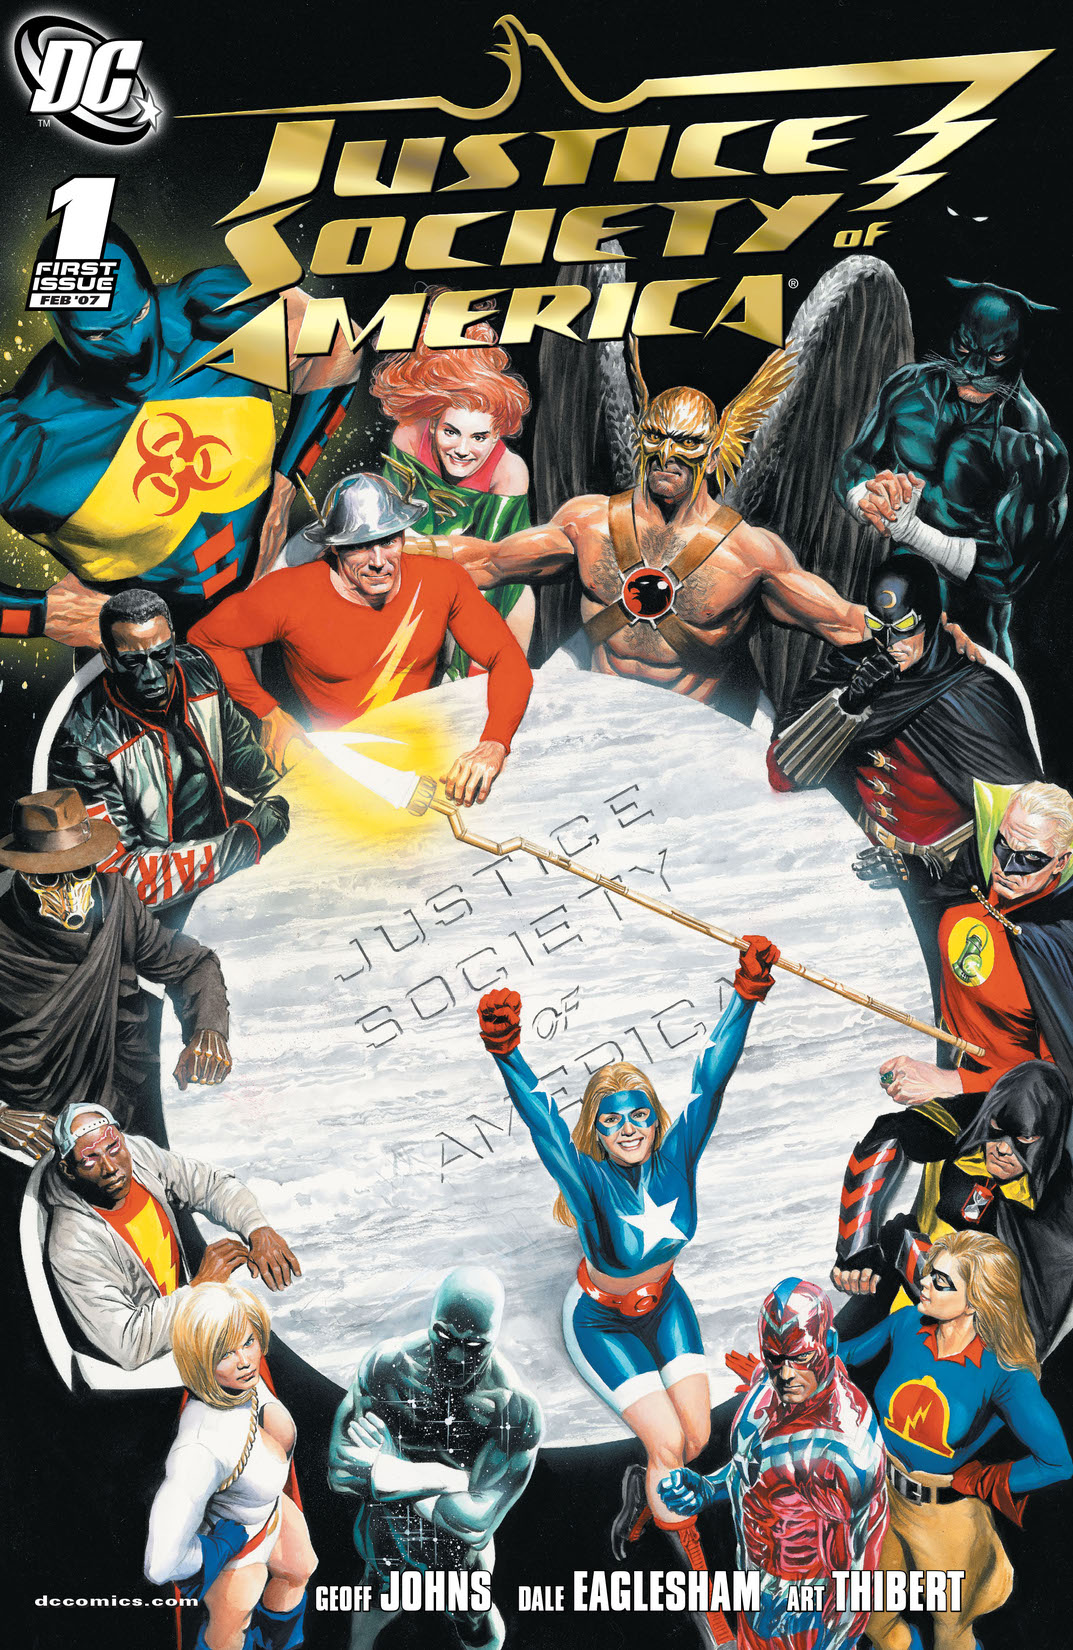 Justice Society of America (2006-) #1 preview images